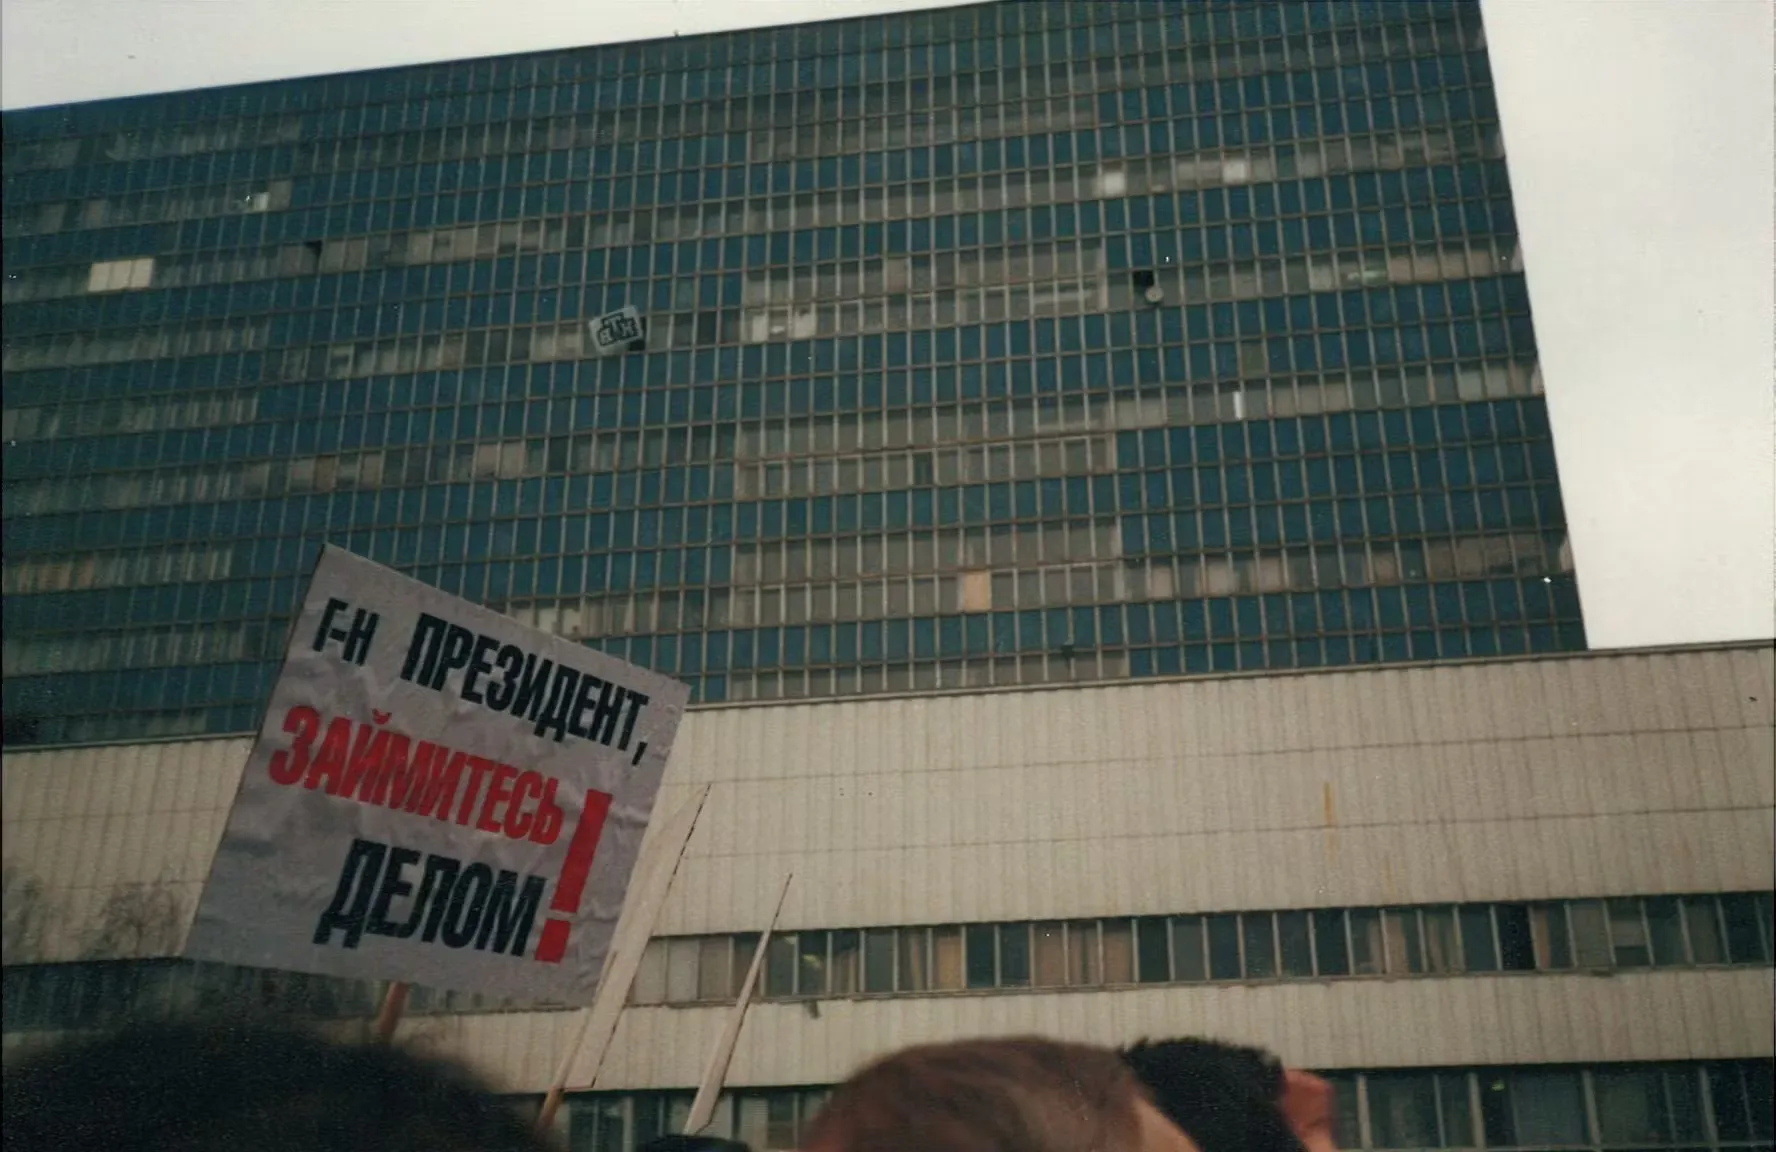 Shot this outside of Ostankino during protests in 2001